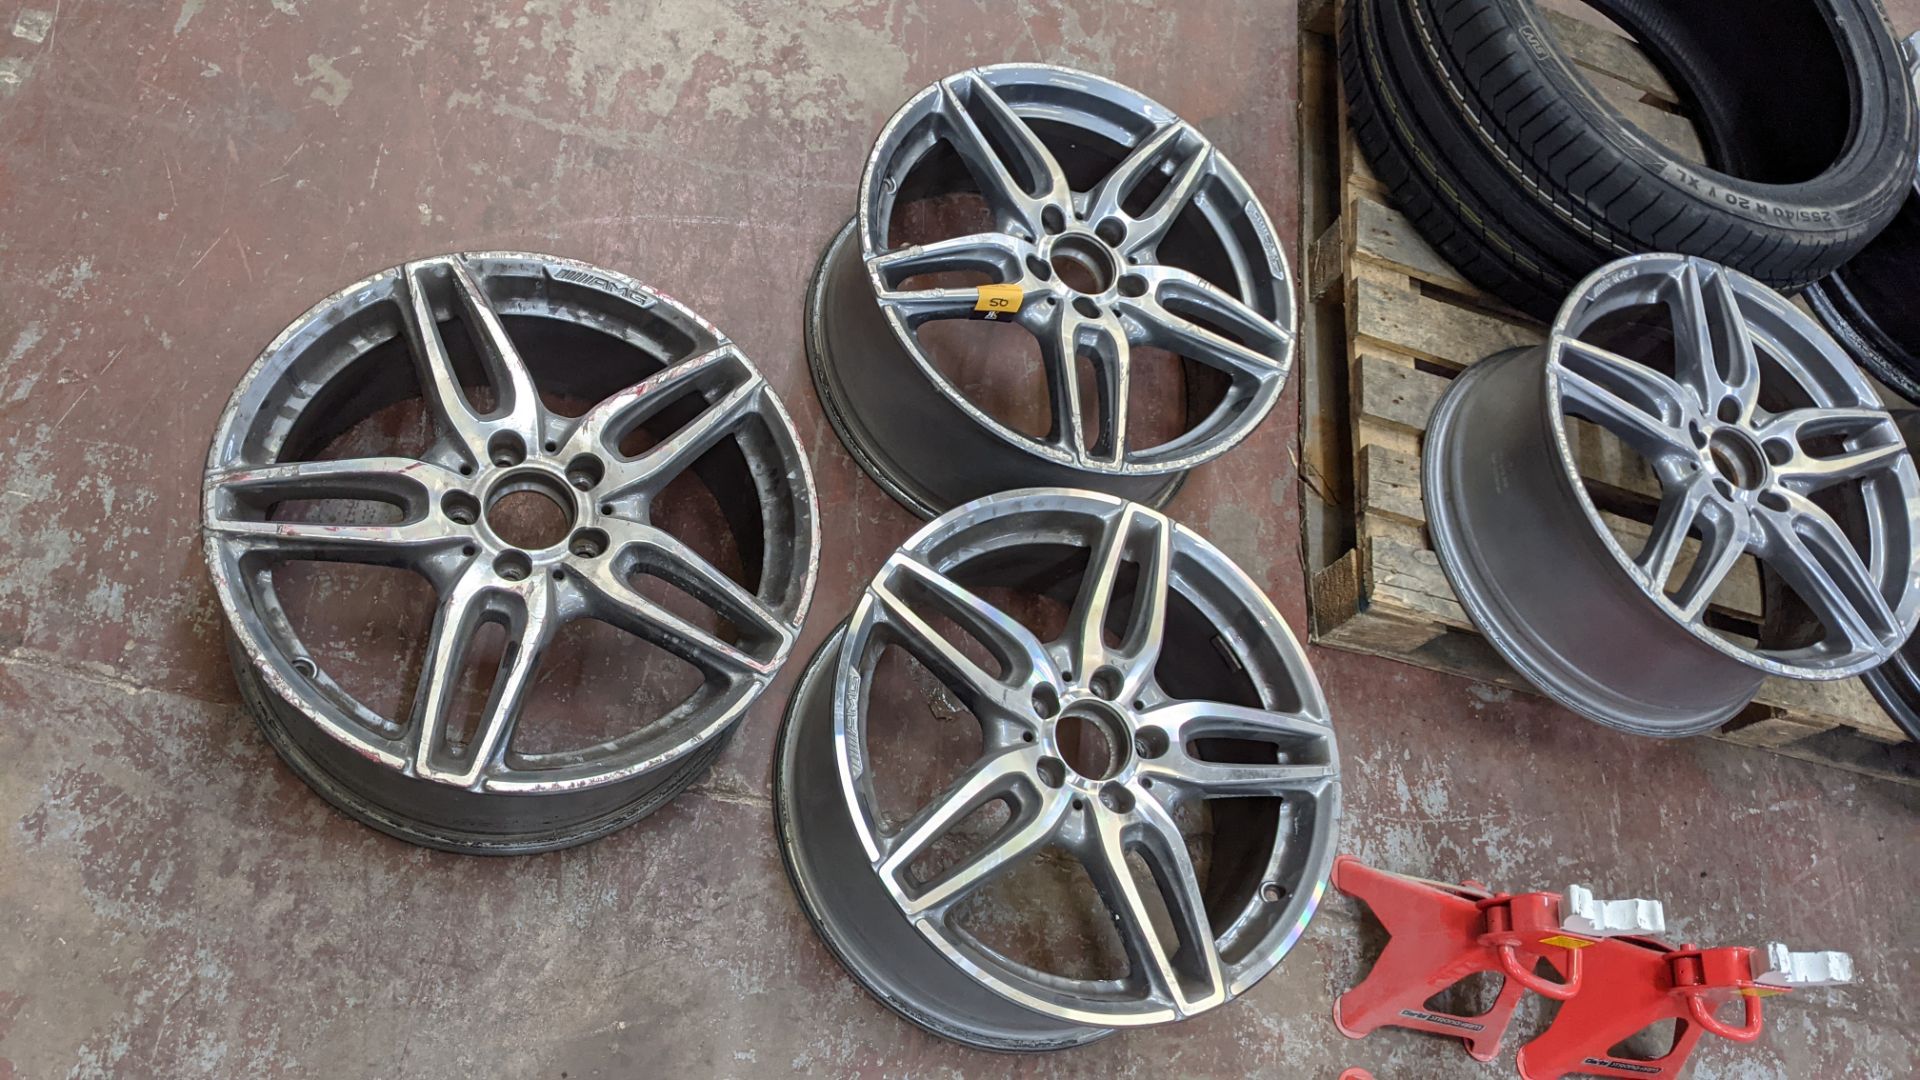 Set of 4 AMG 19" alloy wheels in 2 tone grey painted & silver polished finish - Image 5 of 16